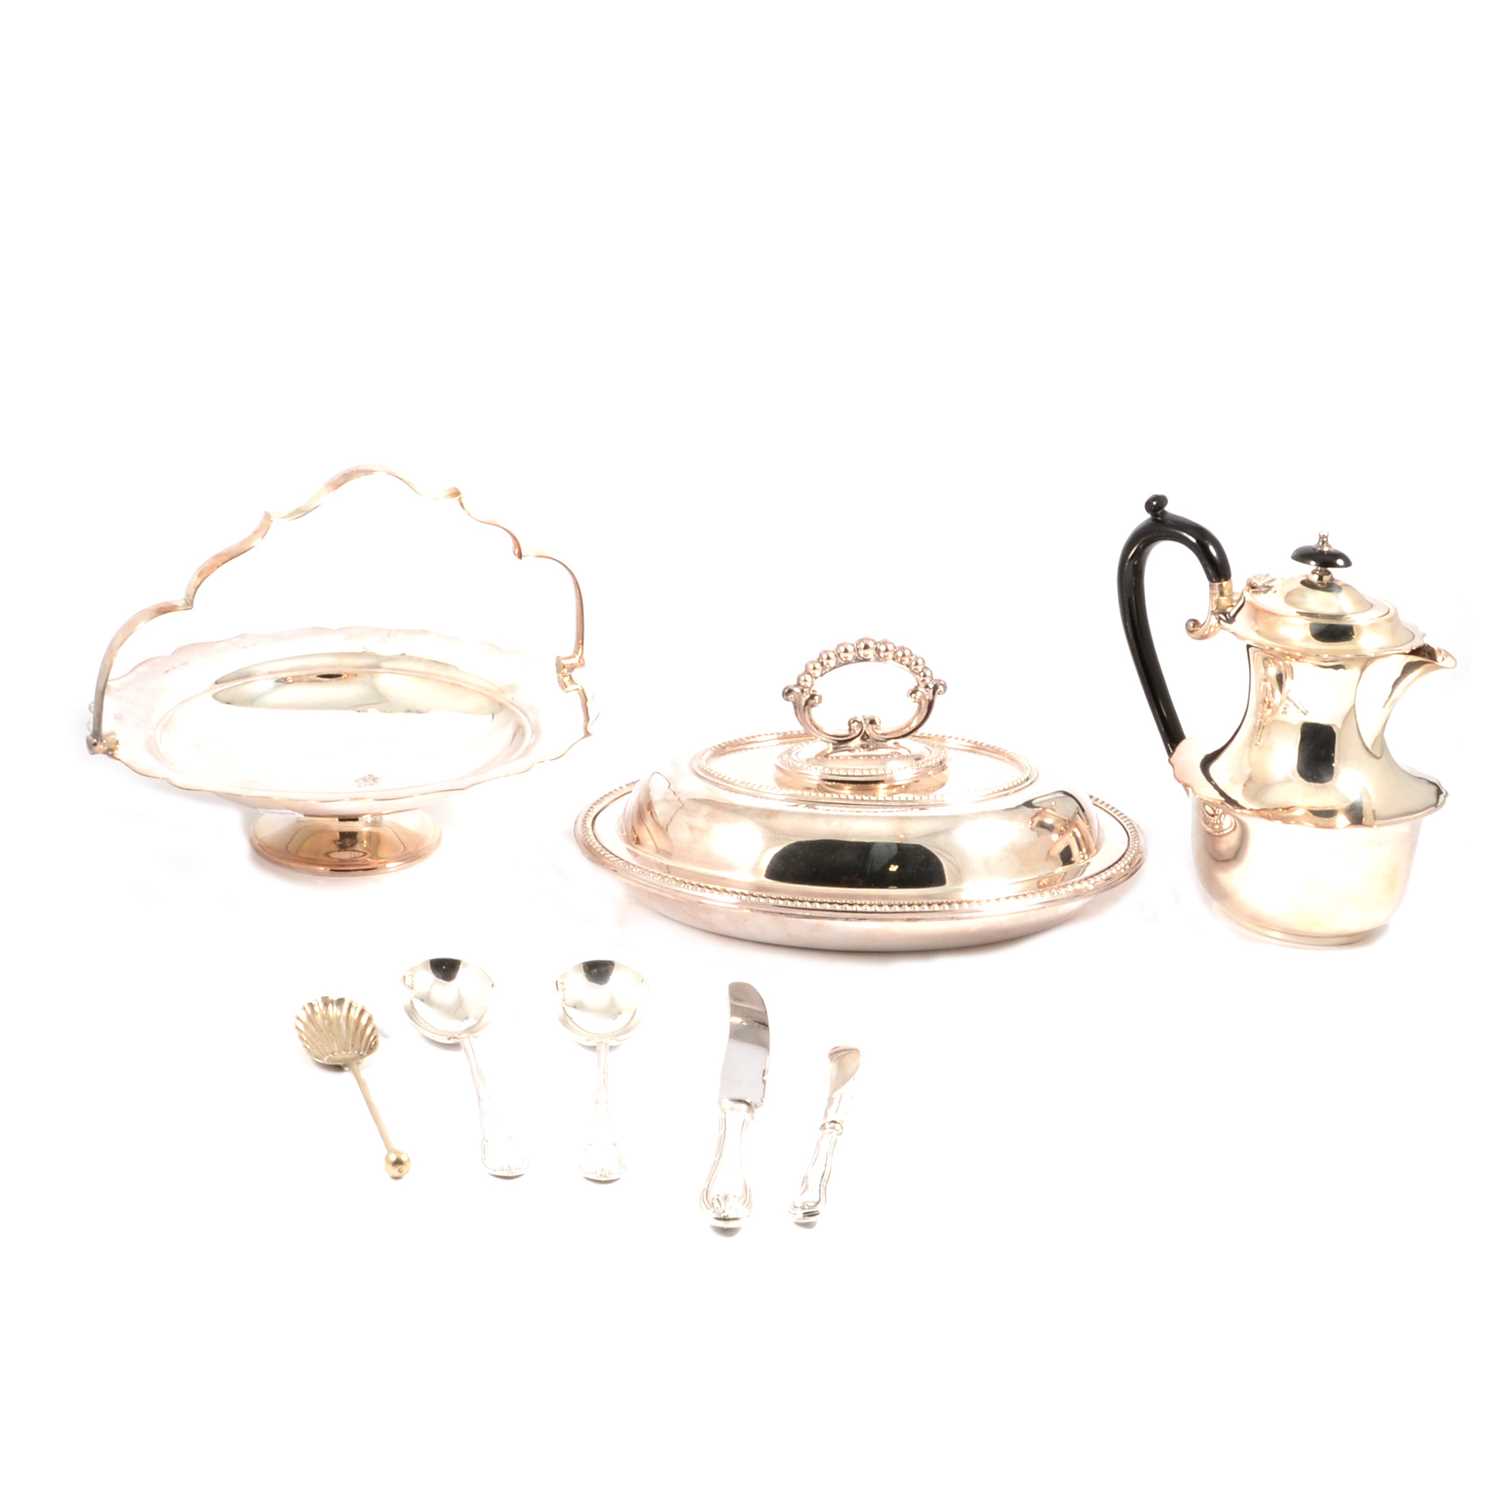 A silver-plated four piece teaset, entree dish, flatware, cake stand, pair of goblets.